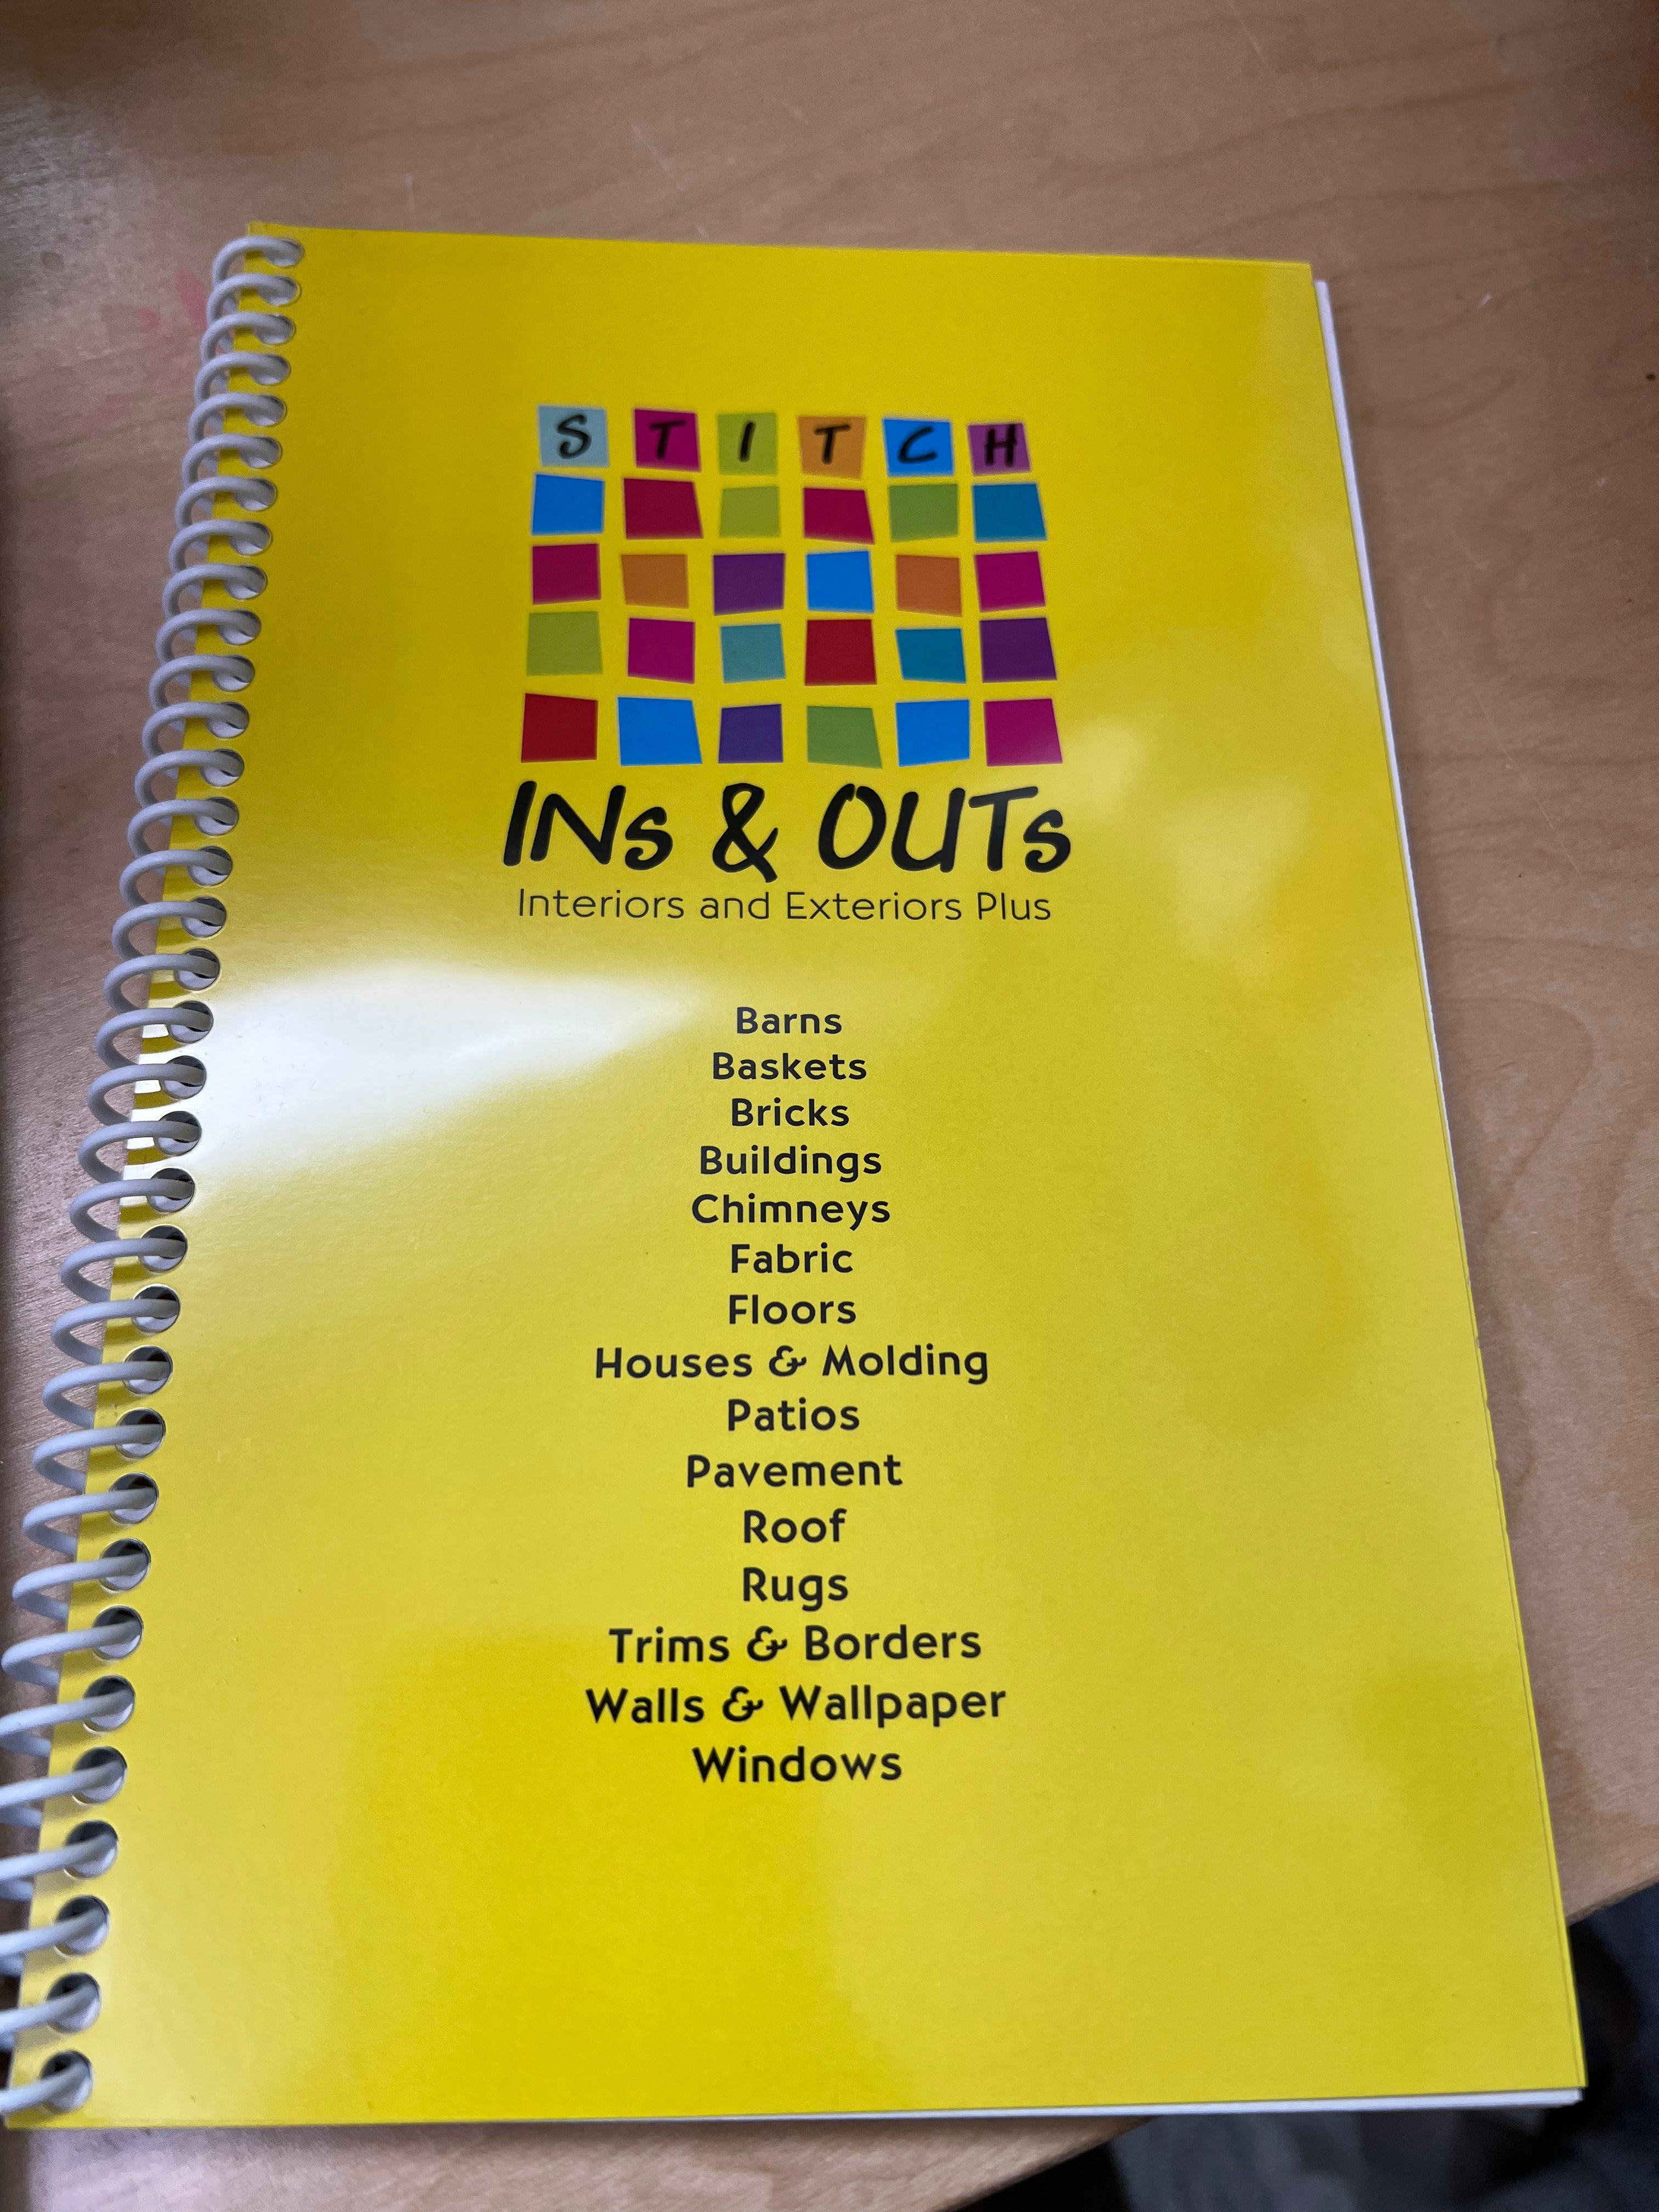 Ins & Outs Interiors and Exteriors Plus Book